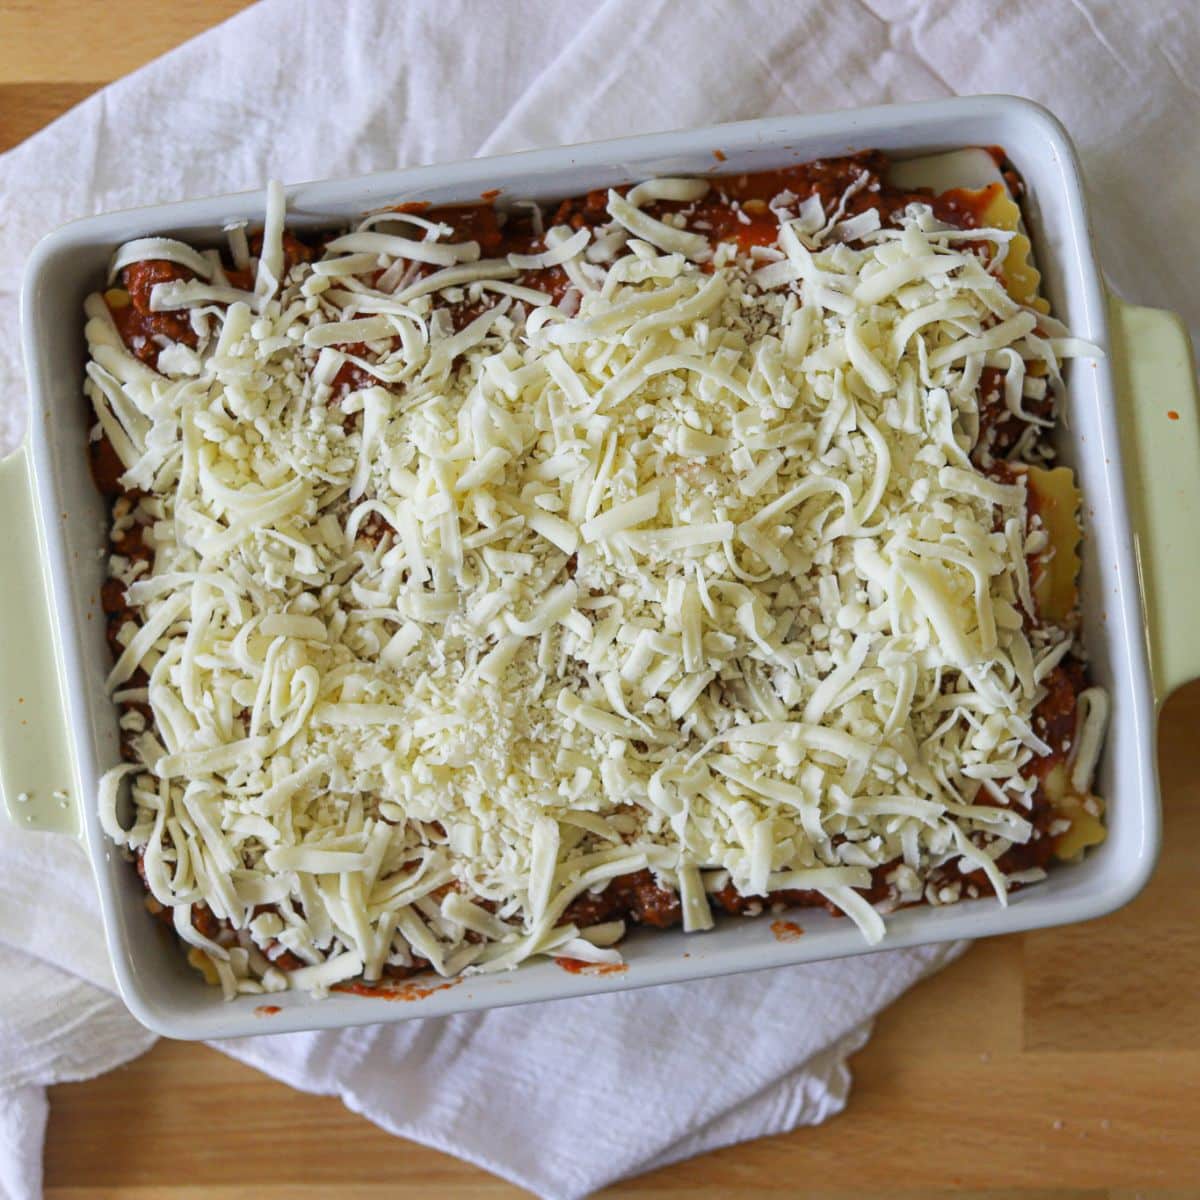 a baked ravioli topped with shredded cheese.